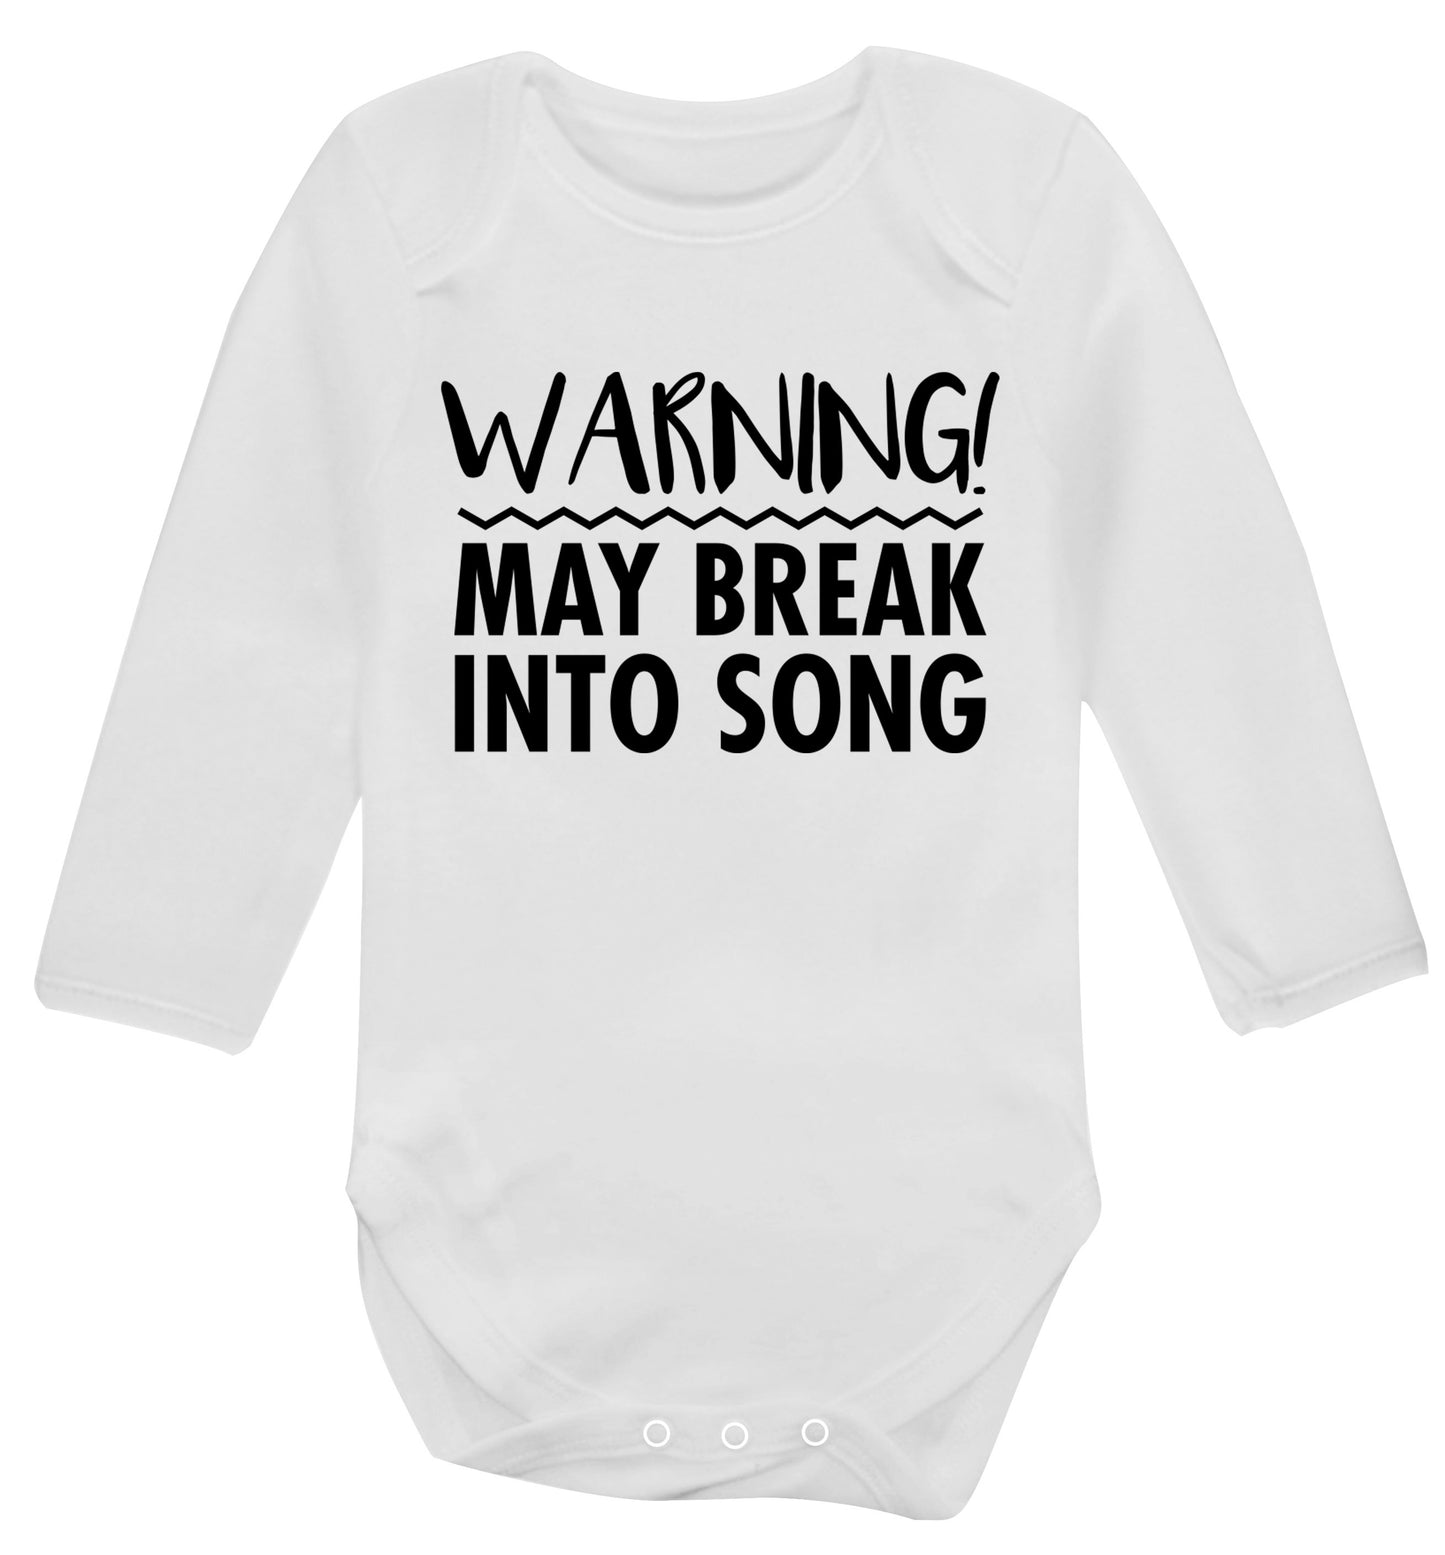 Warning may break into song Baby Vest long sleeved white 6-12 months